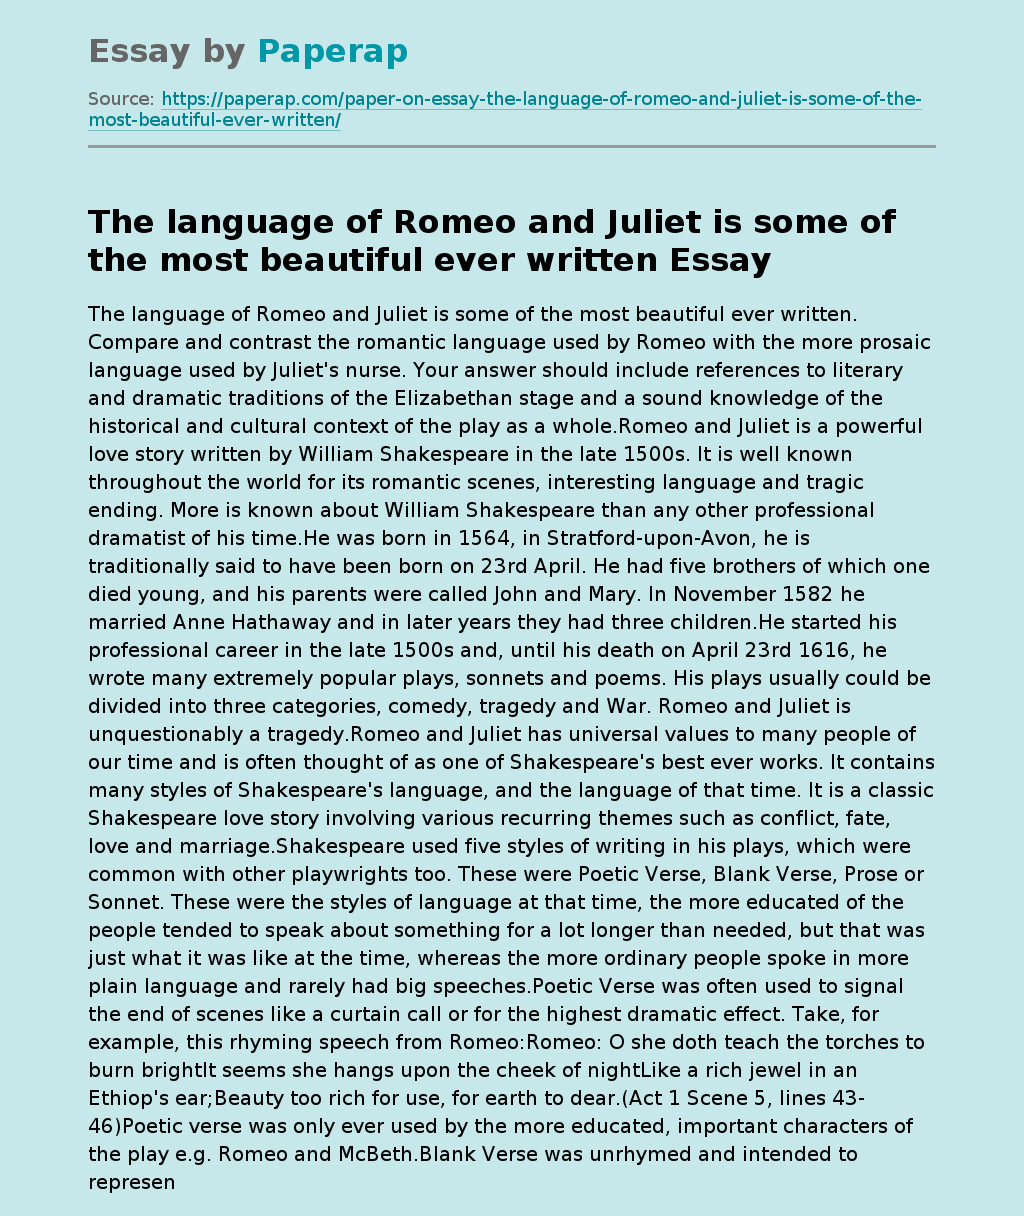 The language of Romeo and Juliet is some of the most beautiful ever written